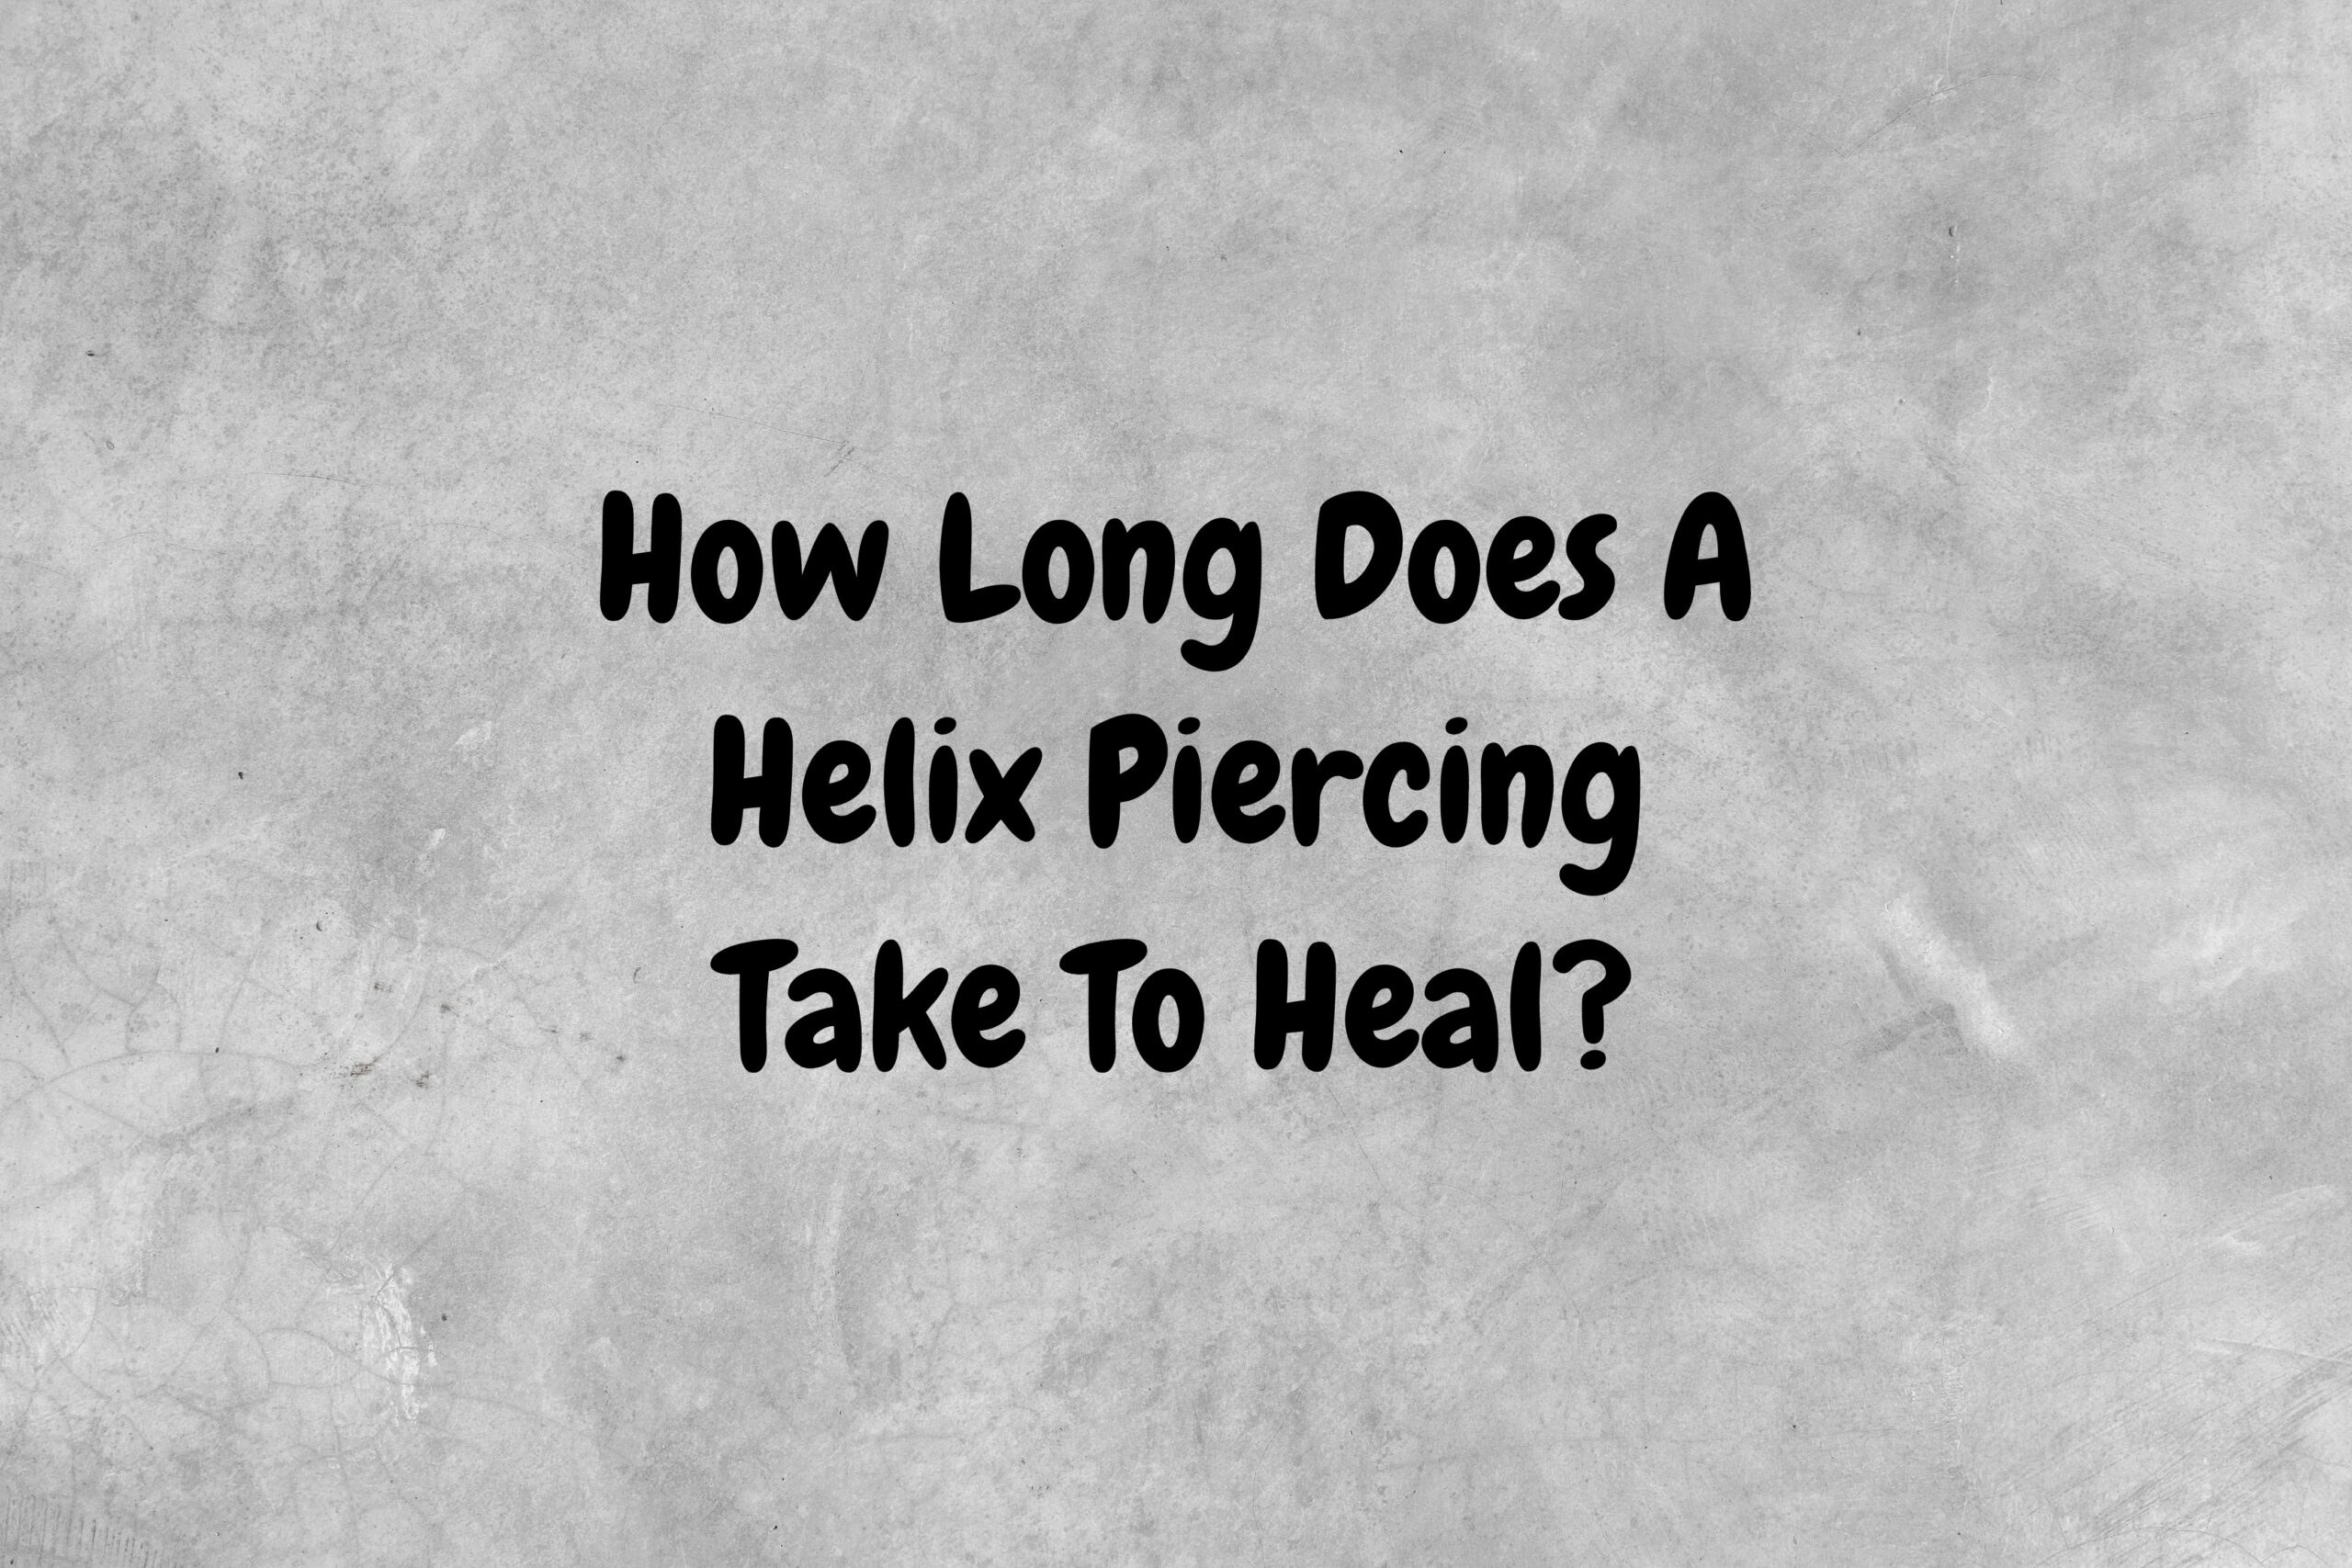 An image with a gray background and black text asking the question, "How long does a helix piercing take to heal?"